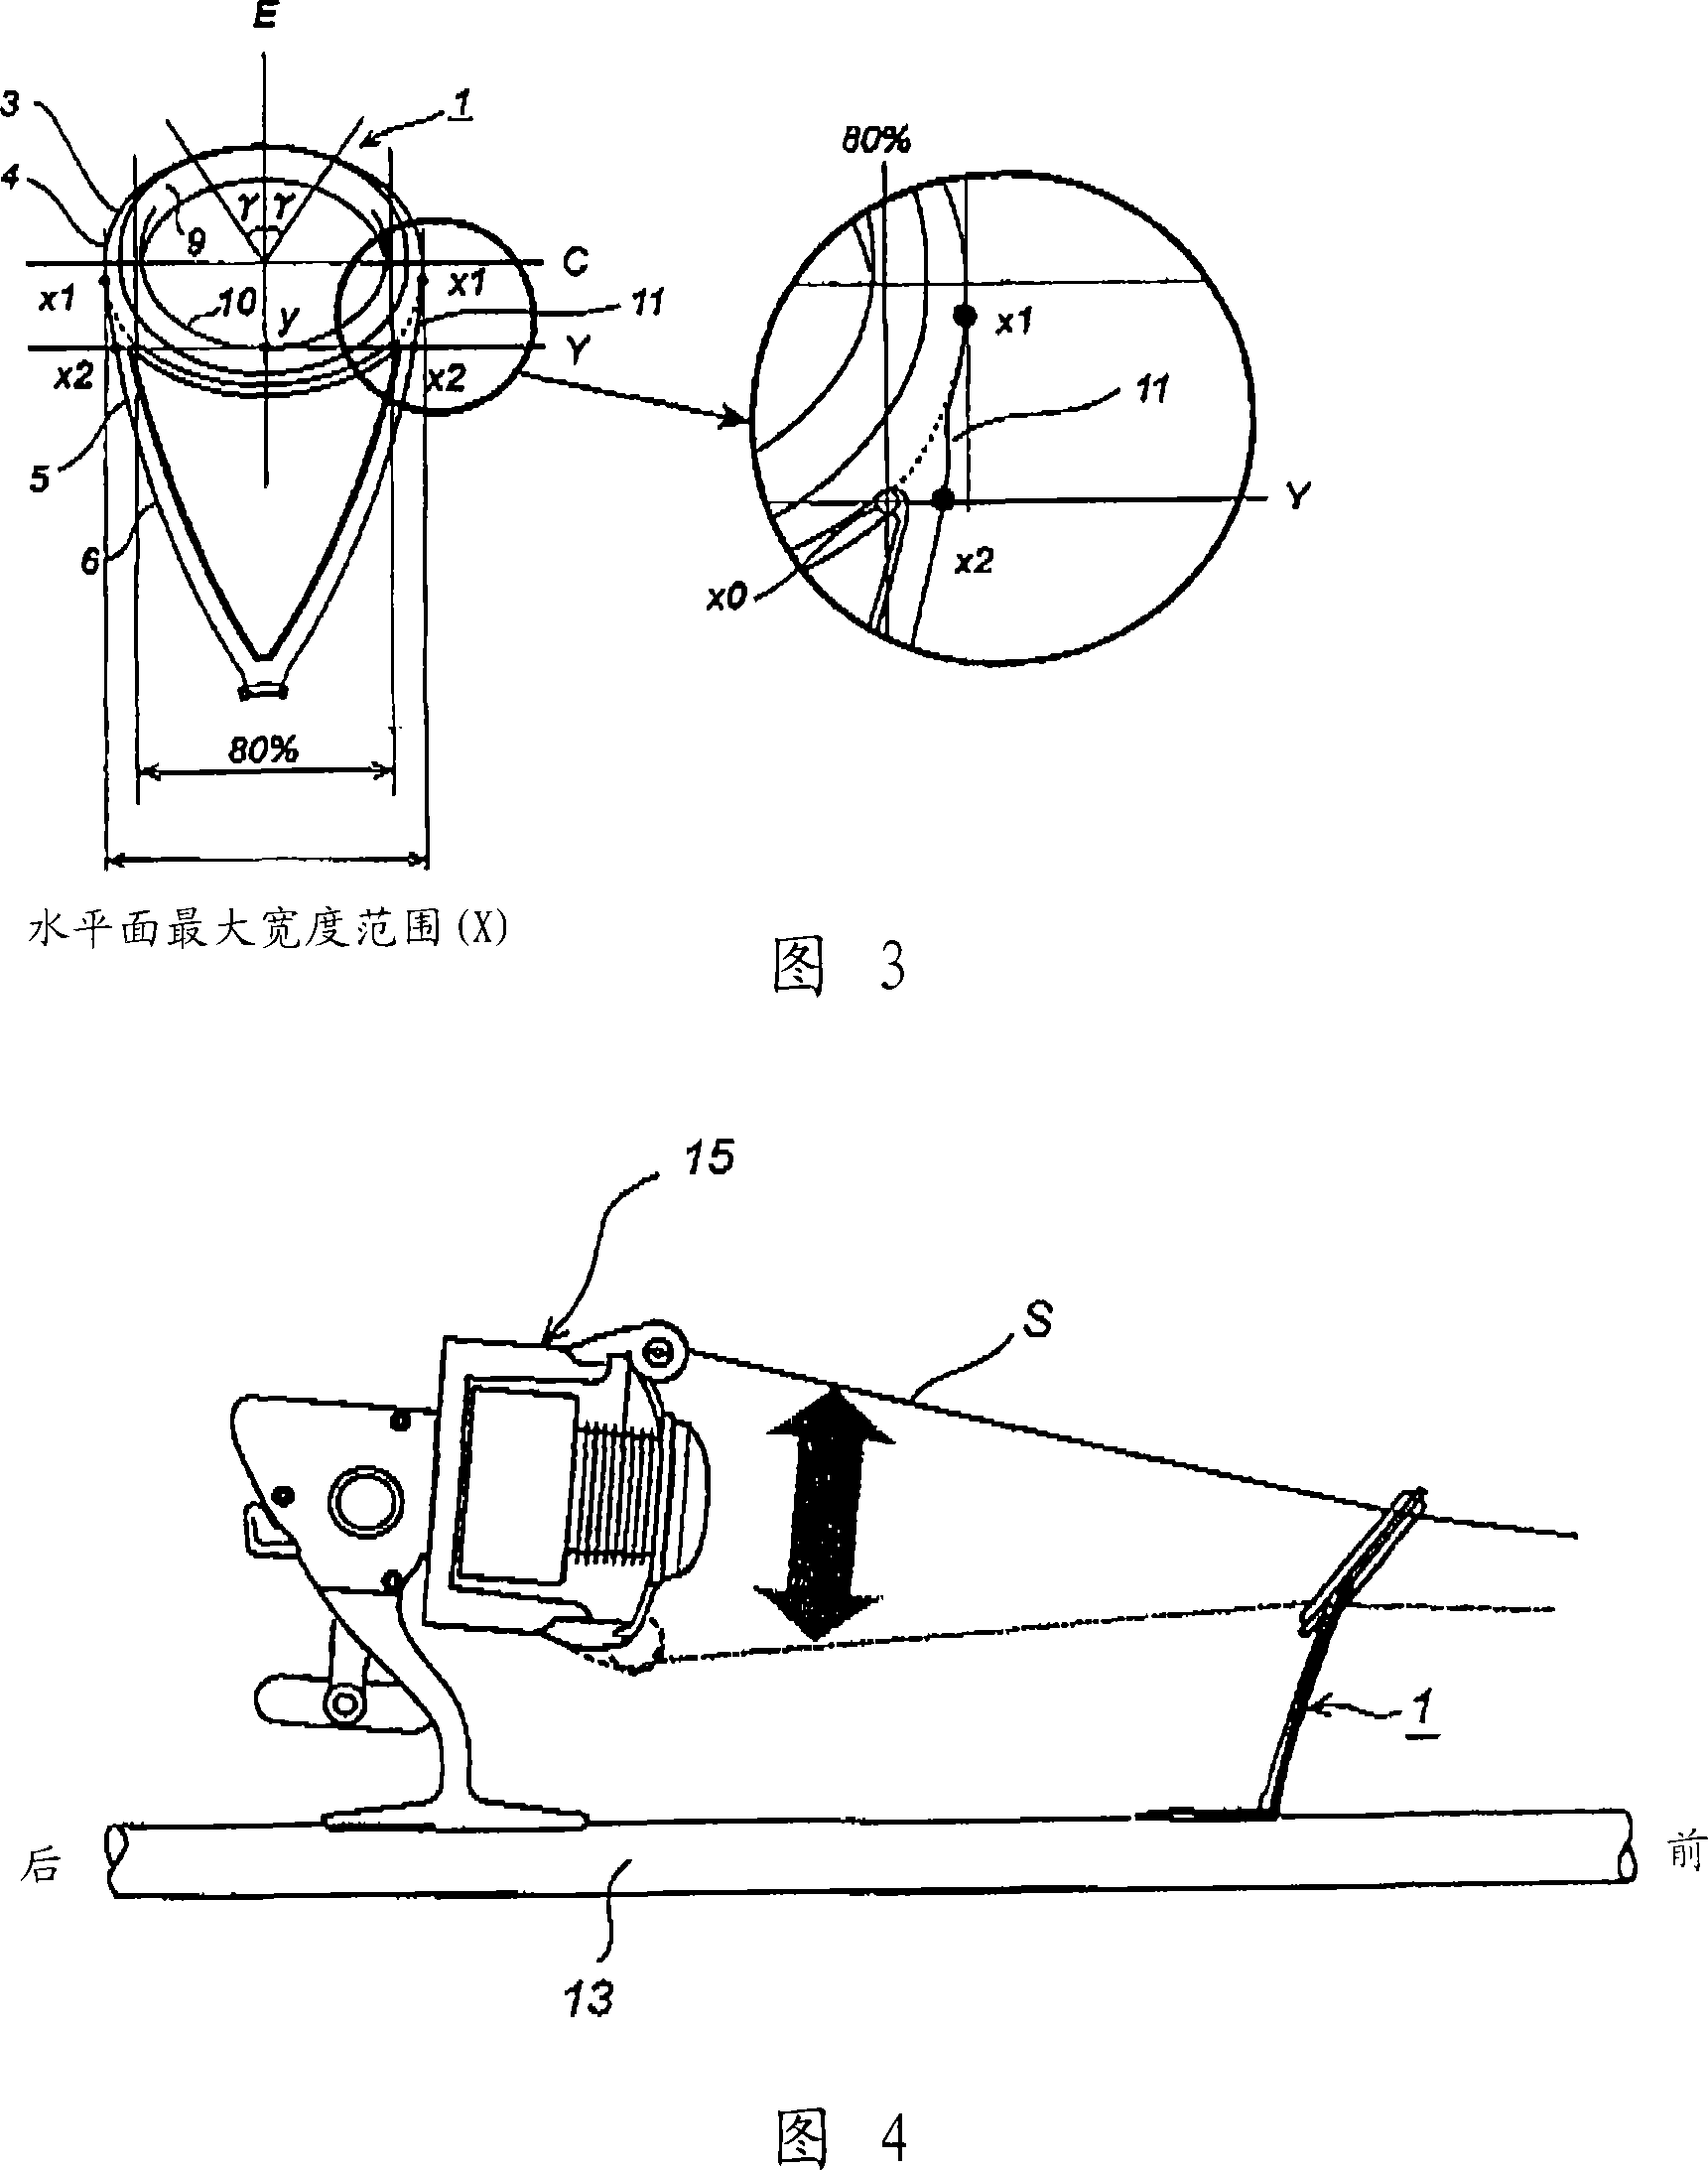 Fishing line guide device